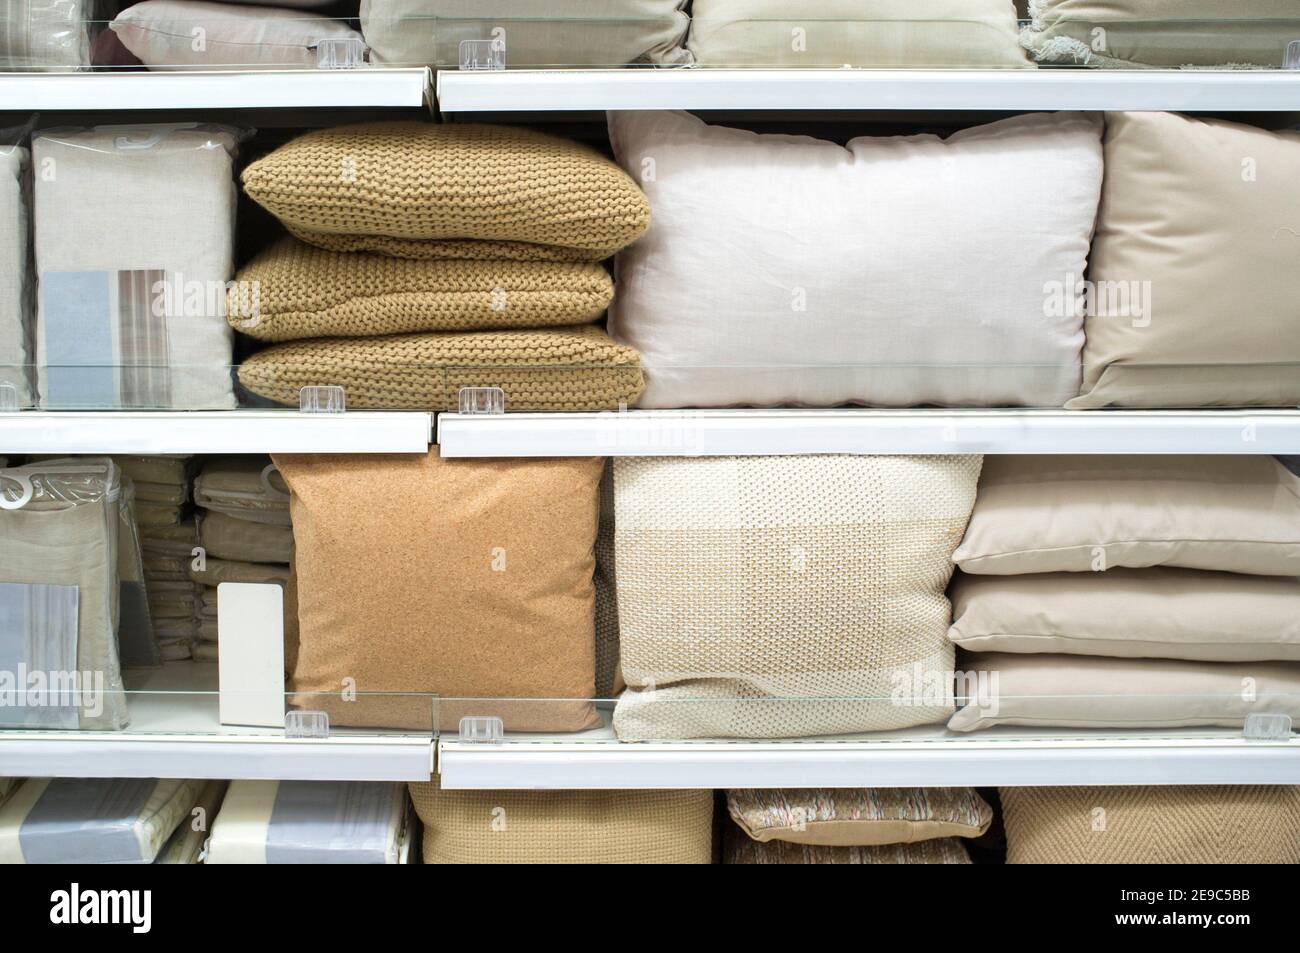 Bright pillows and bed wear on shelves. Selective focus. Stock Photo